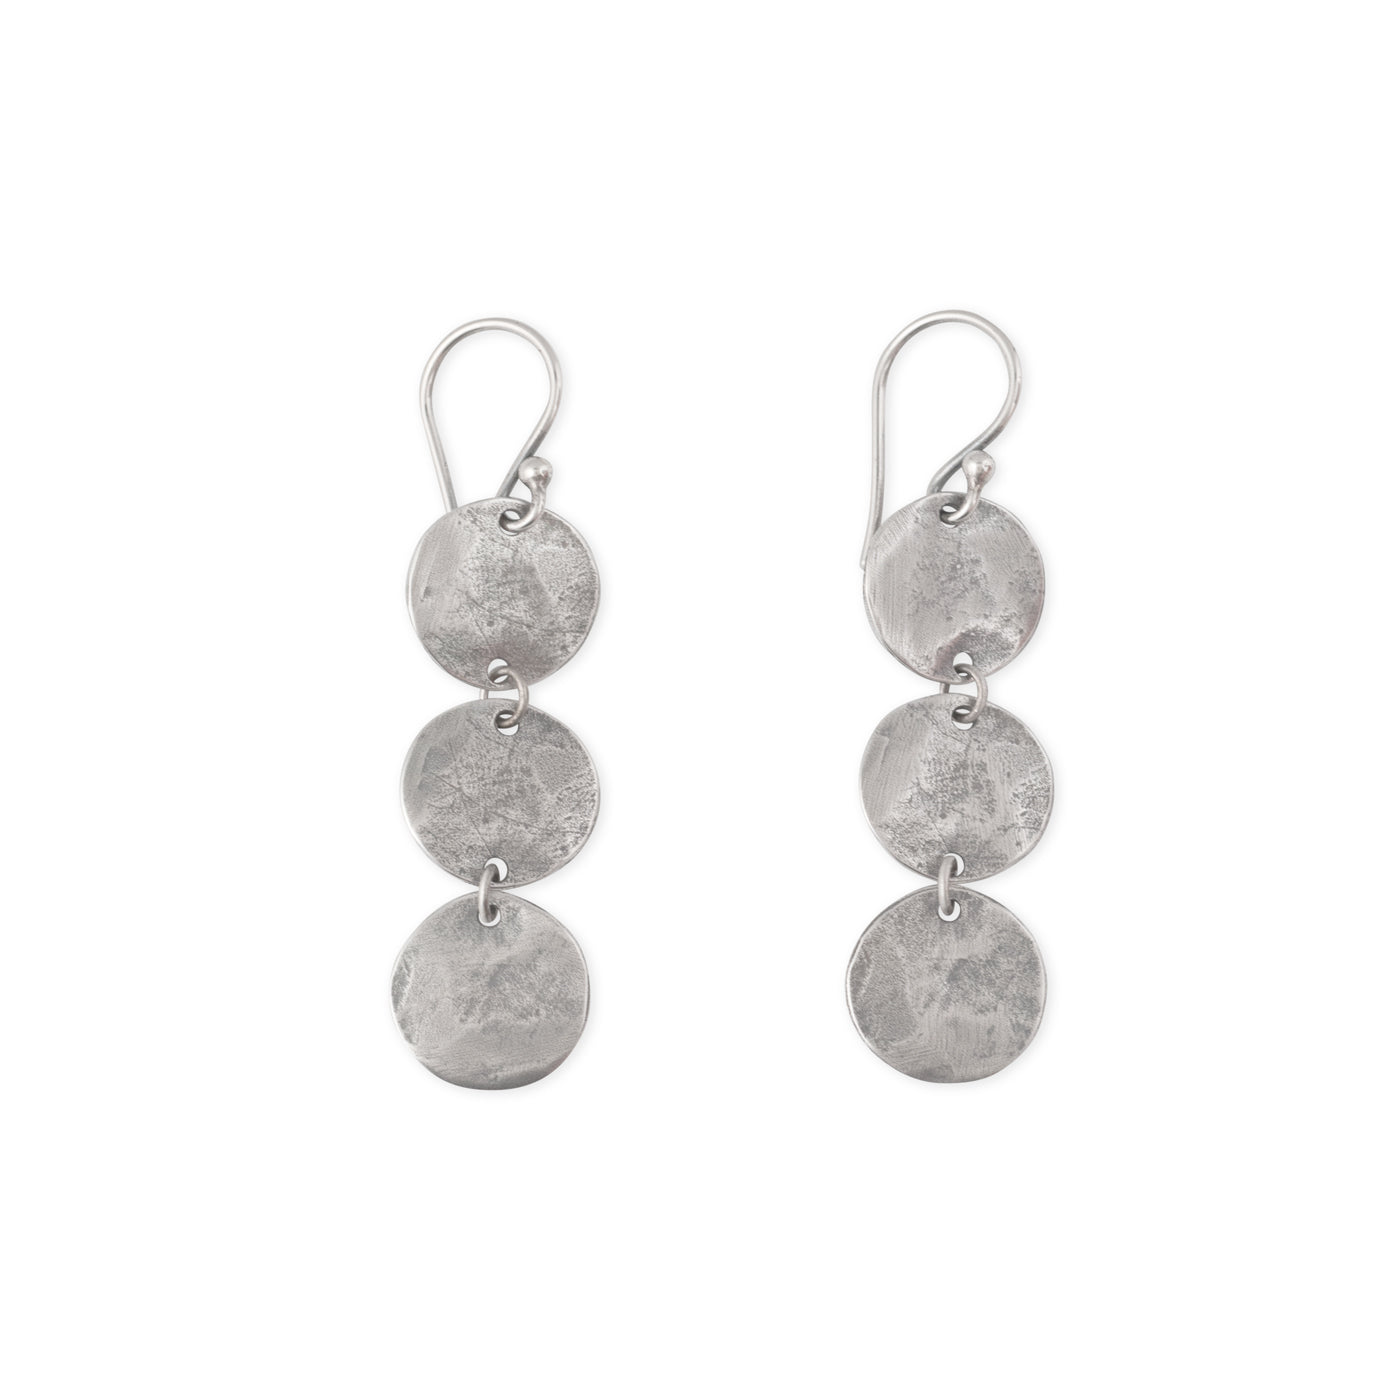 Goddess Earrings handcrafted 3 hammered discs by Kristen Mara